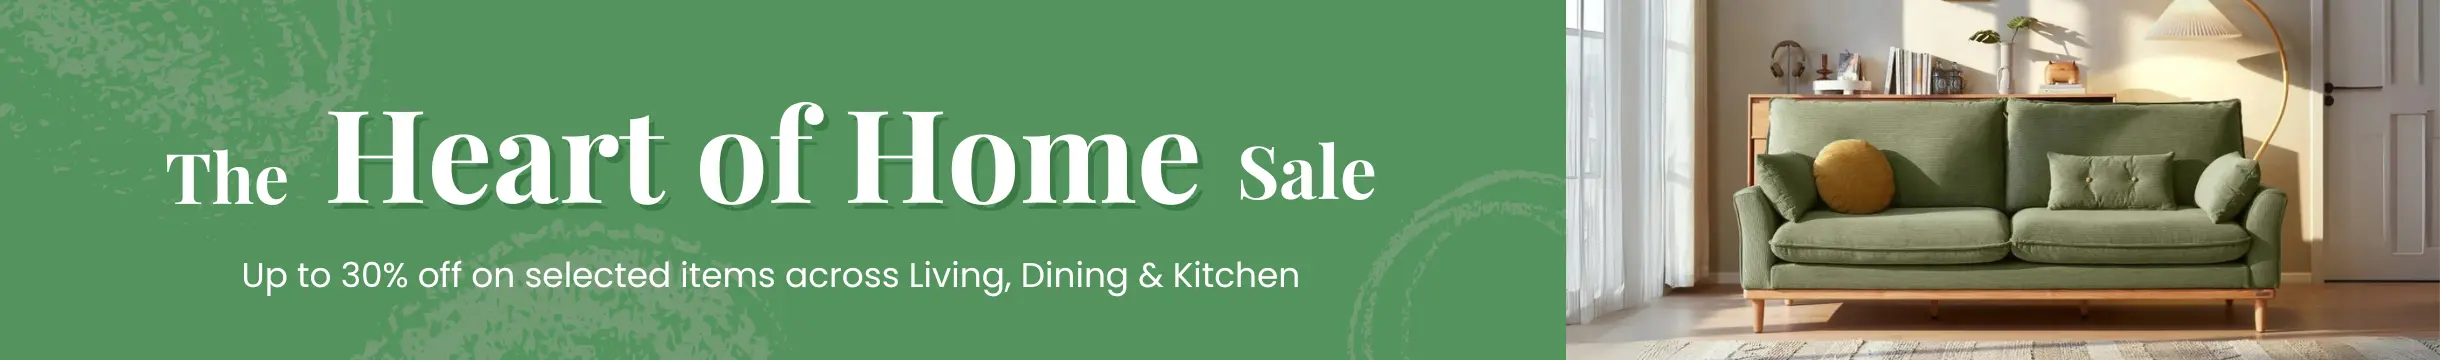 The Heart of Home Sale